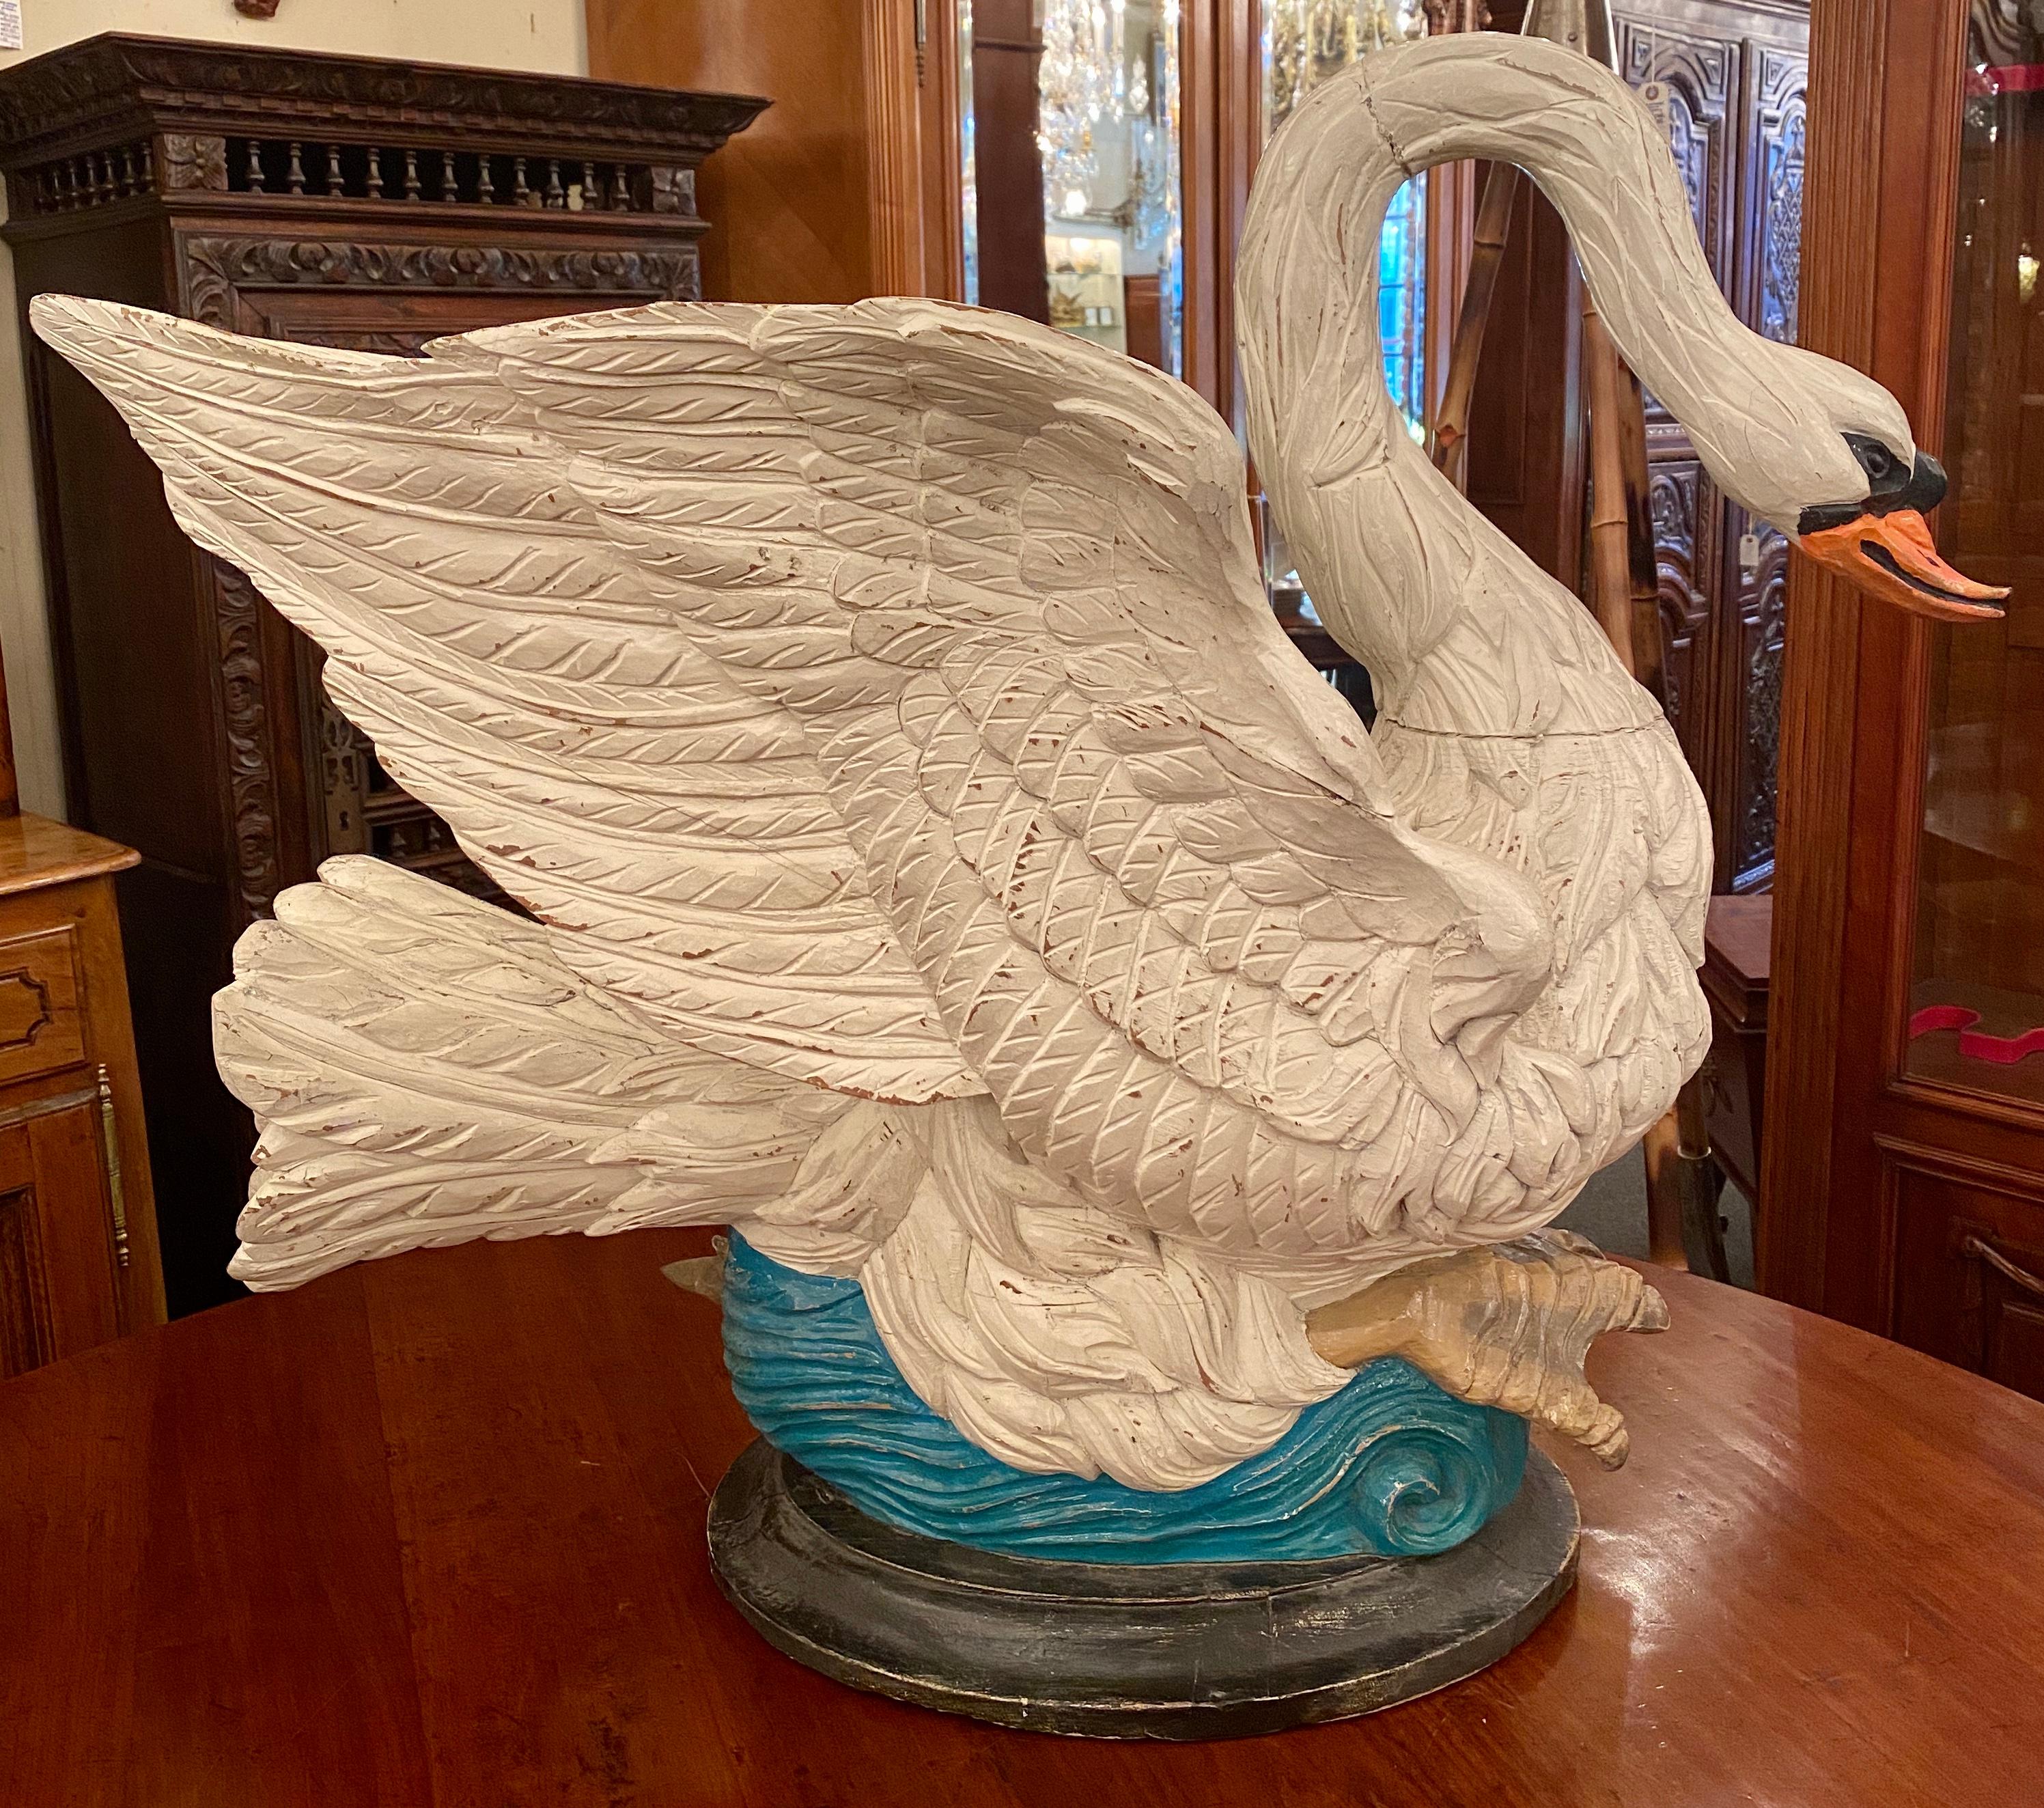 Large estate carved and painted wood swan jardinière, circa 1920-1930.
Exceptional size and carving.